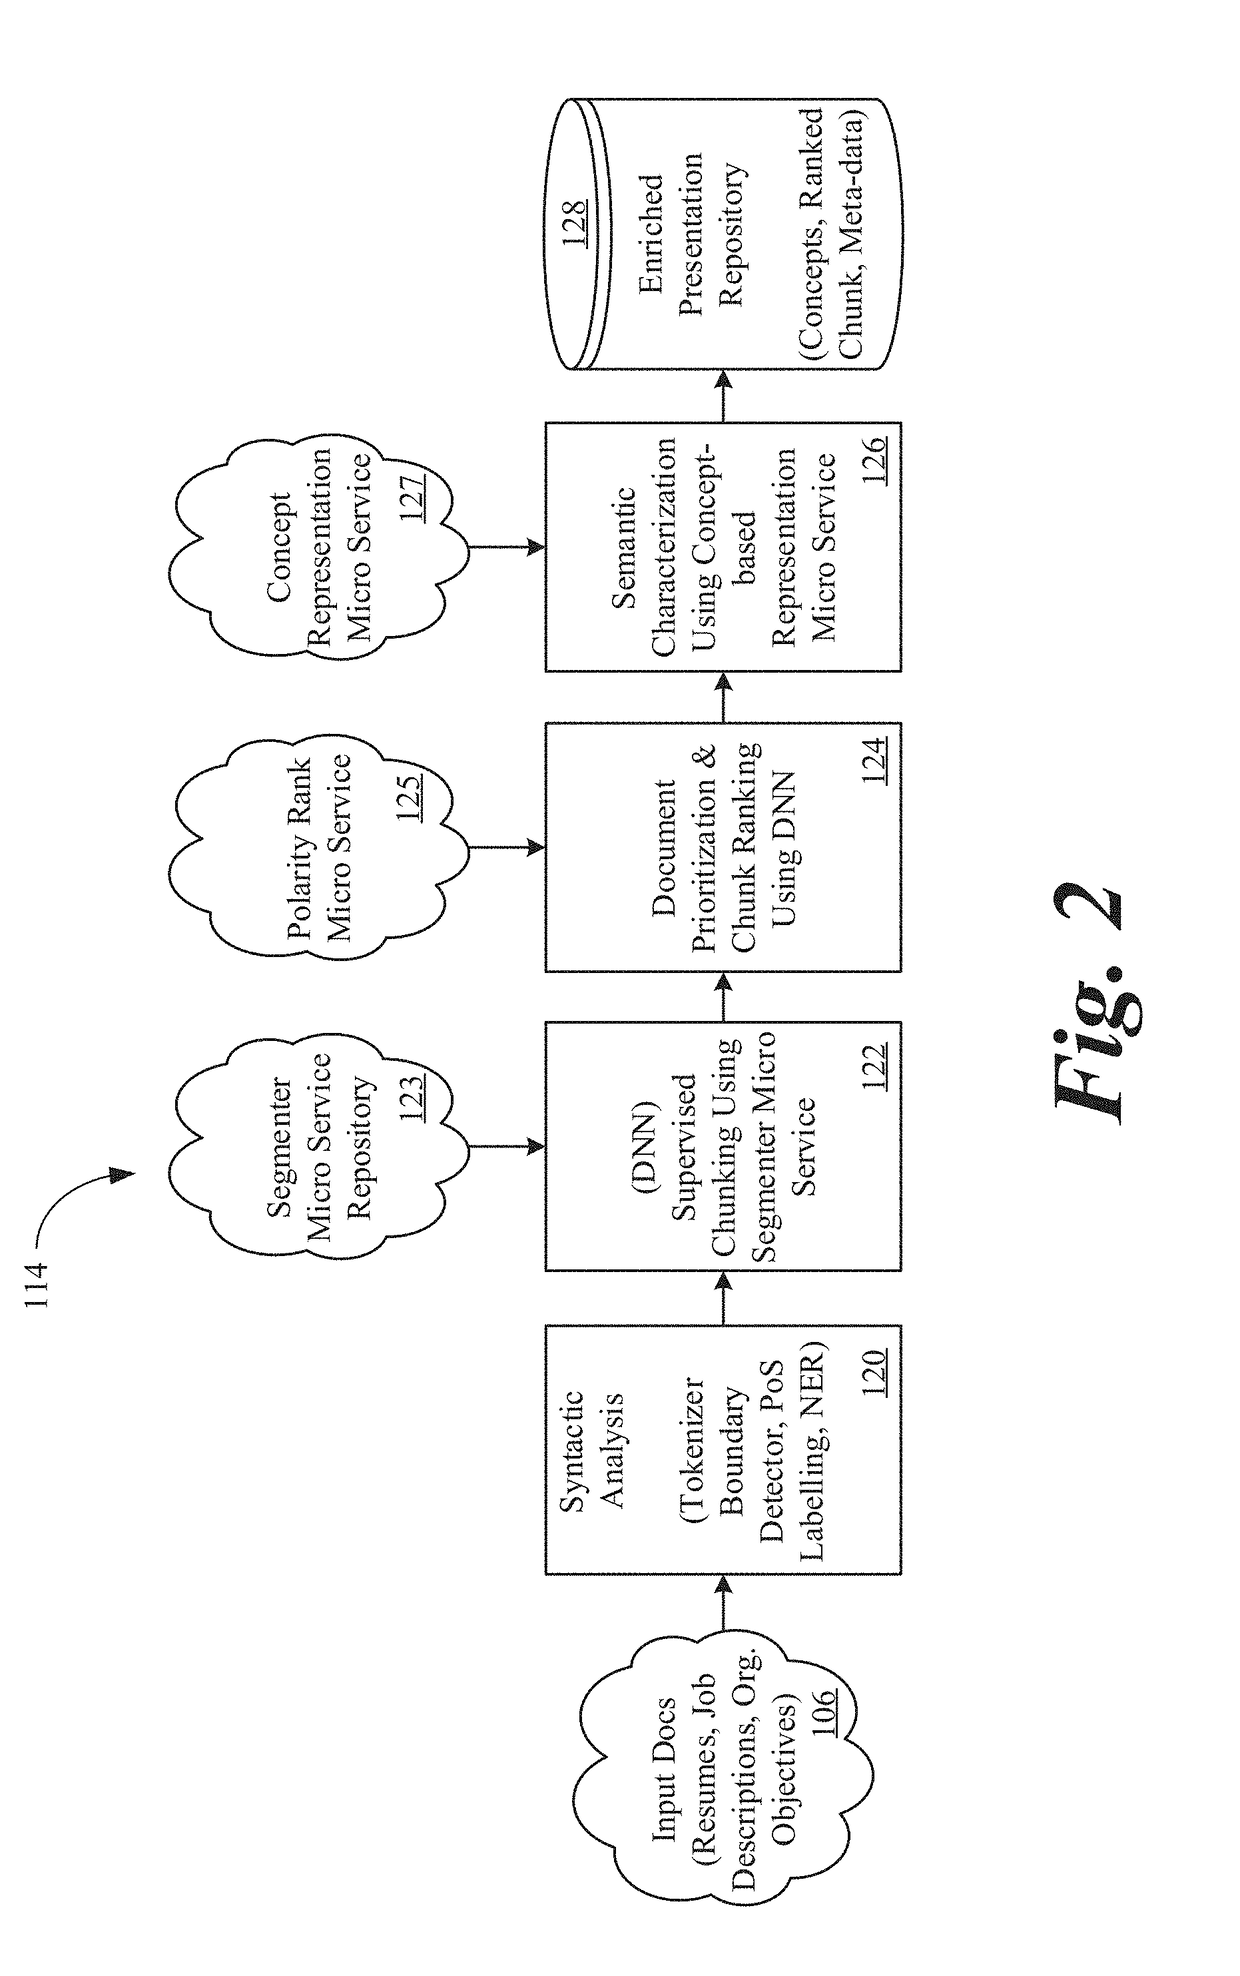 Systems and methods to determine and utilize semantic relatedness between multiple natural language sources to determine strengths and weaknesses